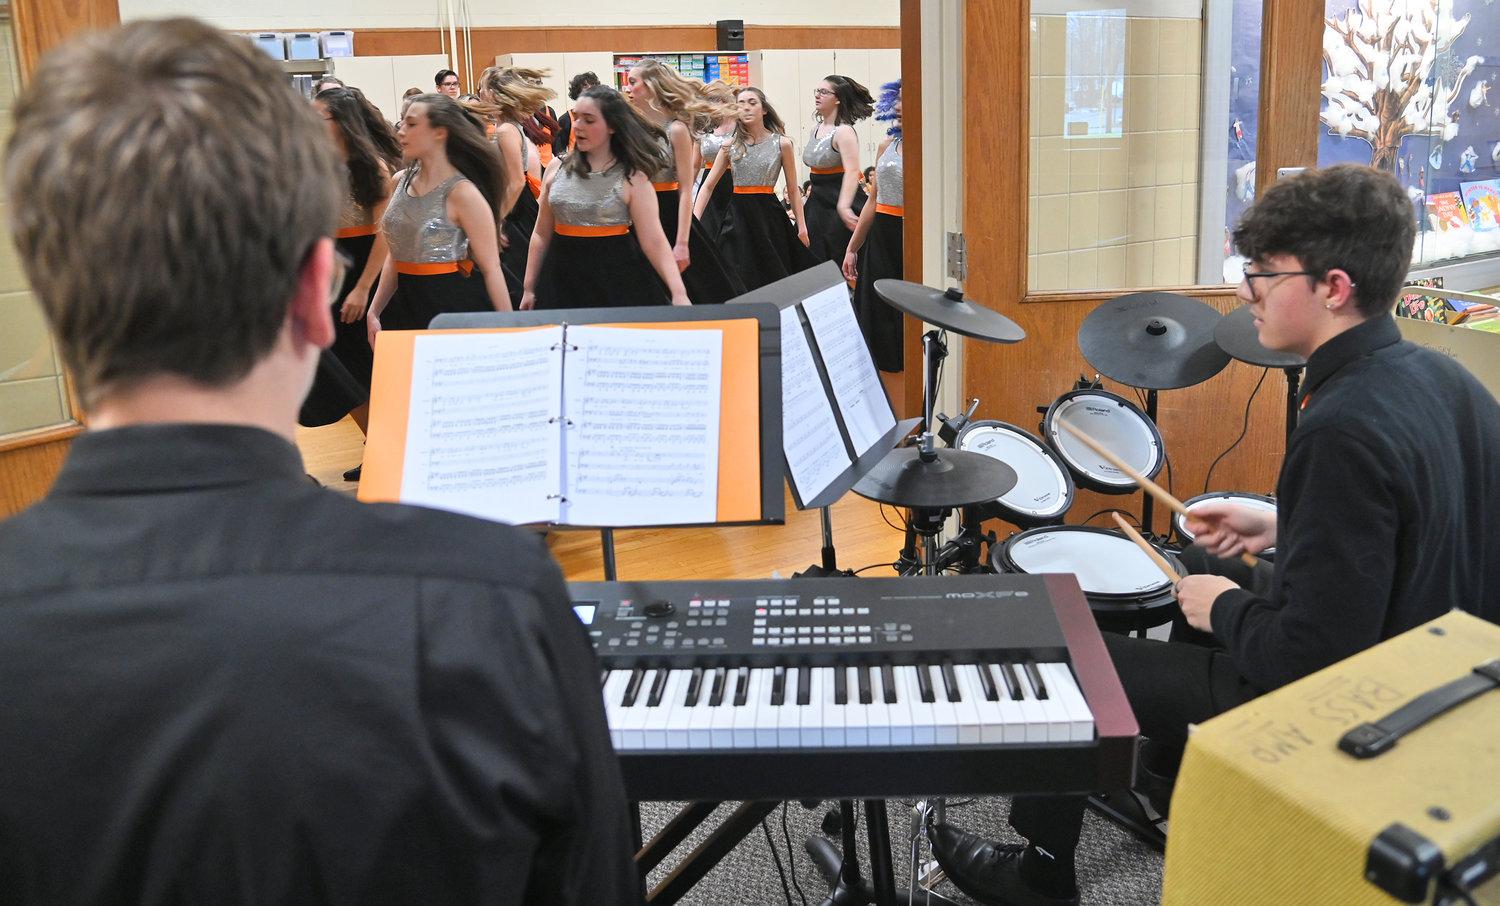 The Rome Free Academy Rhapsody Show Choir performs Friday, Jan. 13 at Clough School in Rome. The band was out in the hallway and singers and dancers were in the gym.